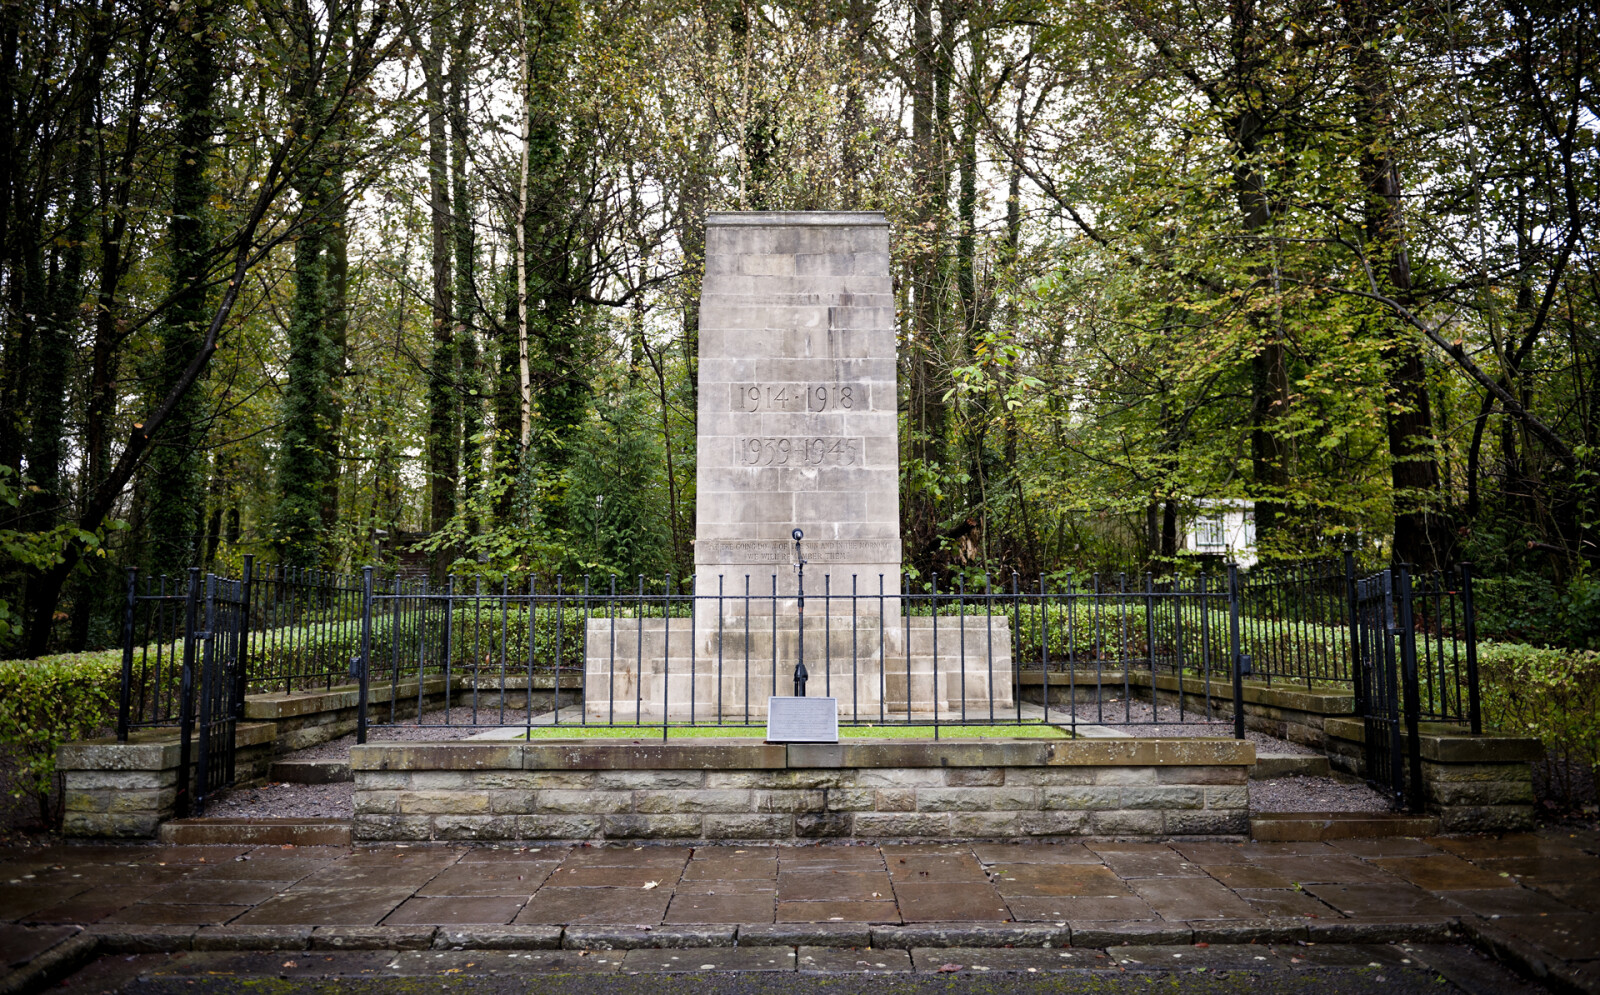 The Newbridge War Memorial. Built in 1936 to commemorate the fallen servicemen of the First World War. Rededicated at the Museum in 1996. Portland stone structure with the inscription 1914 - 1918 1939 - 1945 AT THE GOING DOWN OF THE SUN AND IN THE MORNING